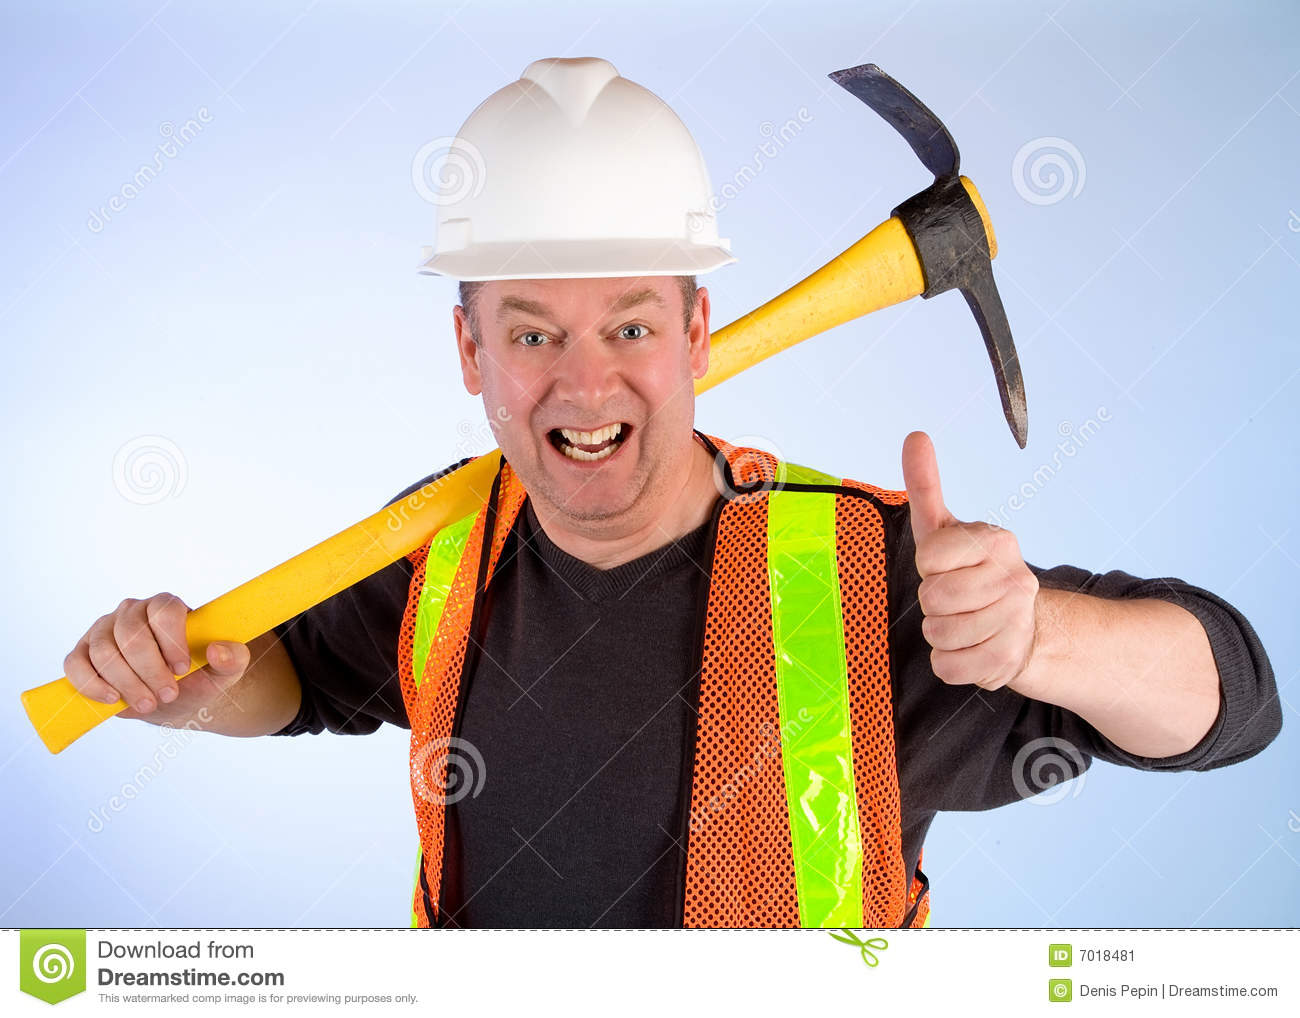 Happy Construction Worker Stock Image   Image  7018481